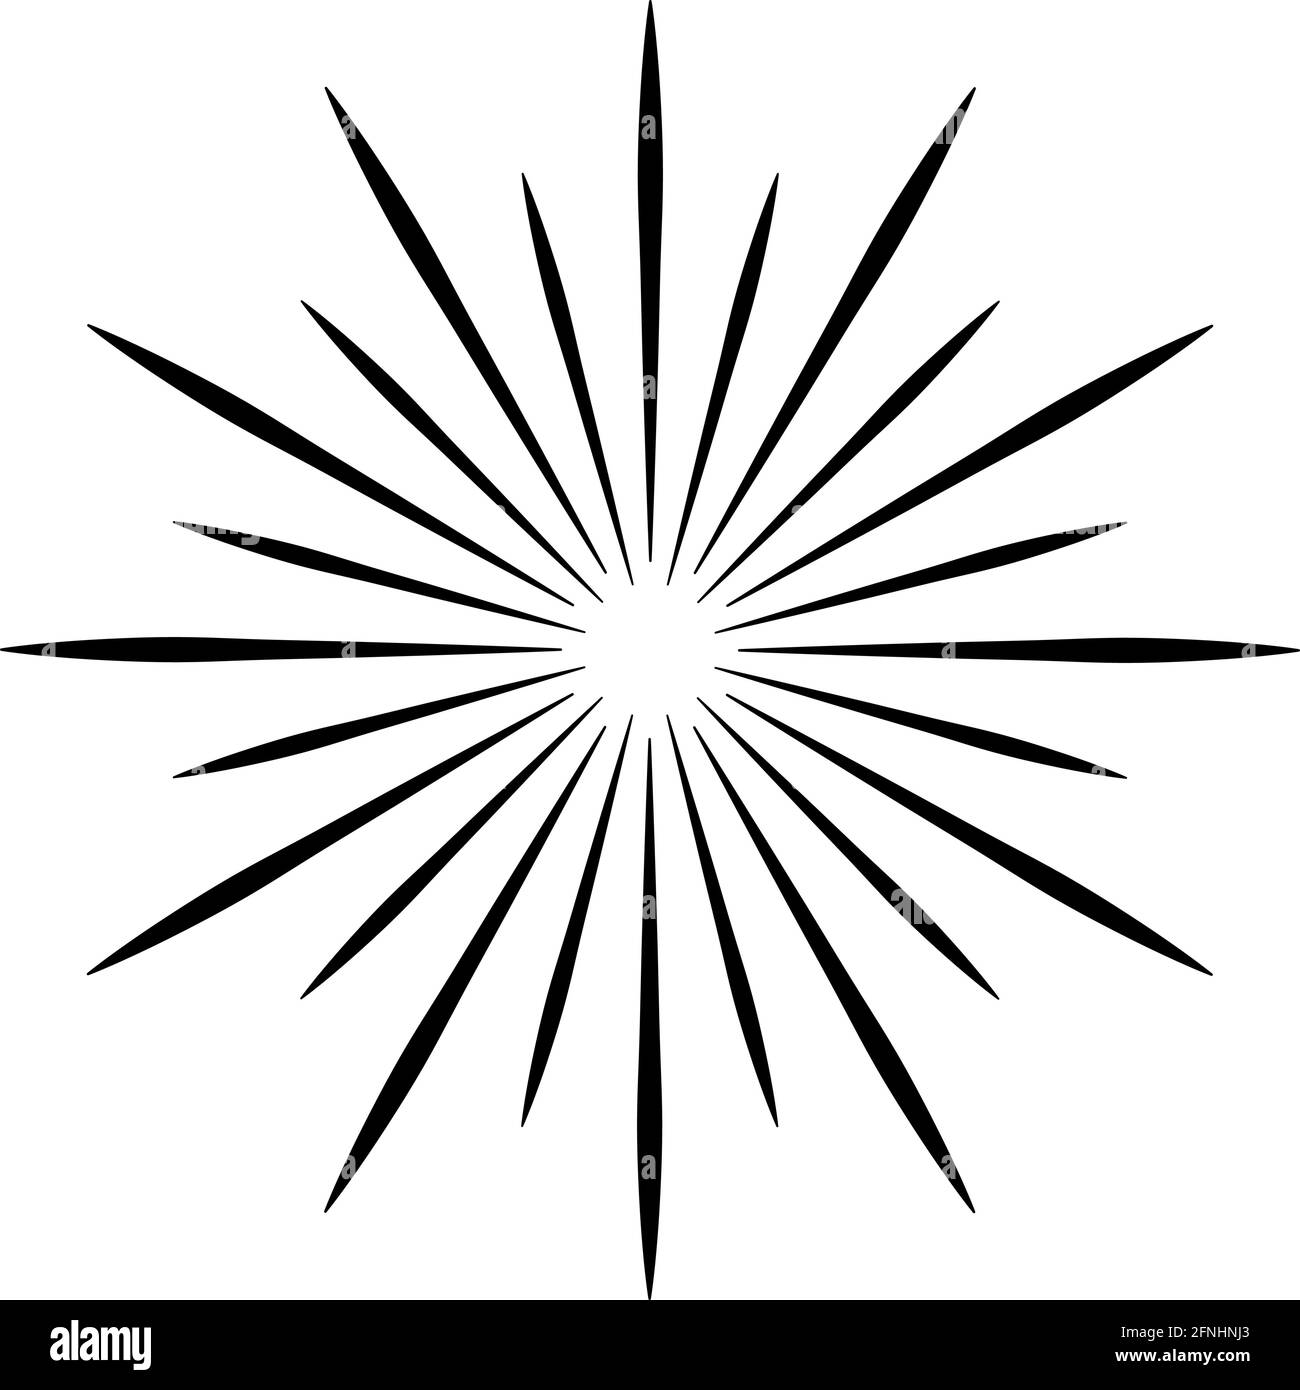 Radial, circular lines, spokes. Radiating lines, stripes. Concentric ...